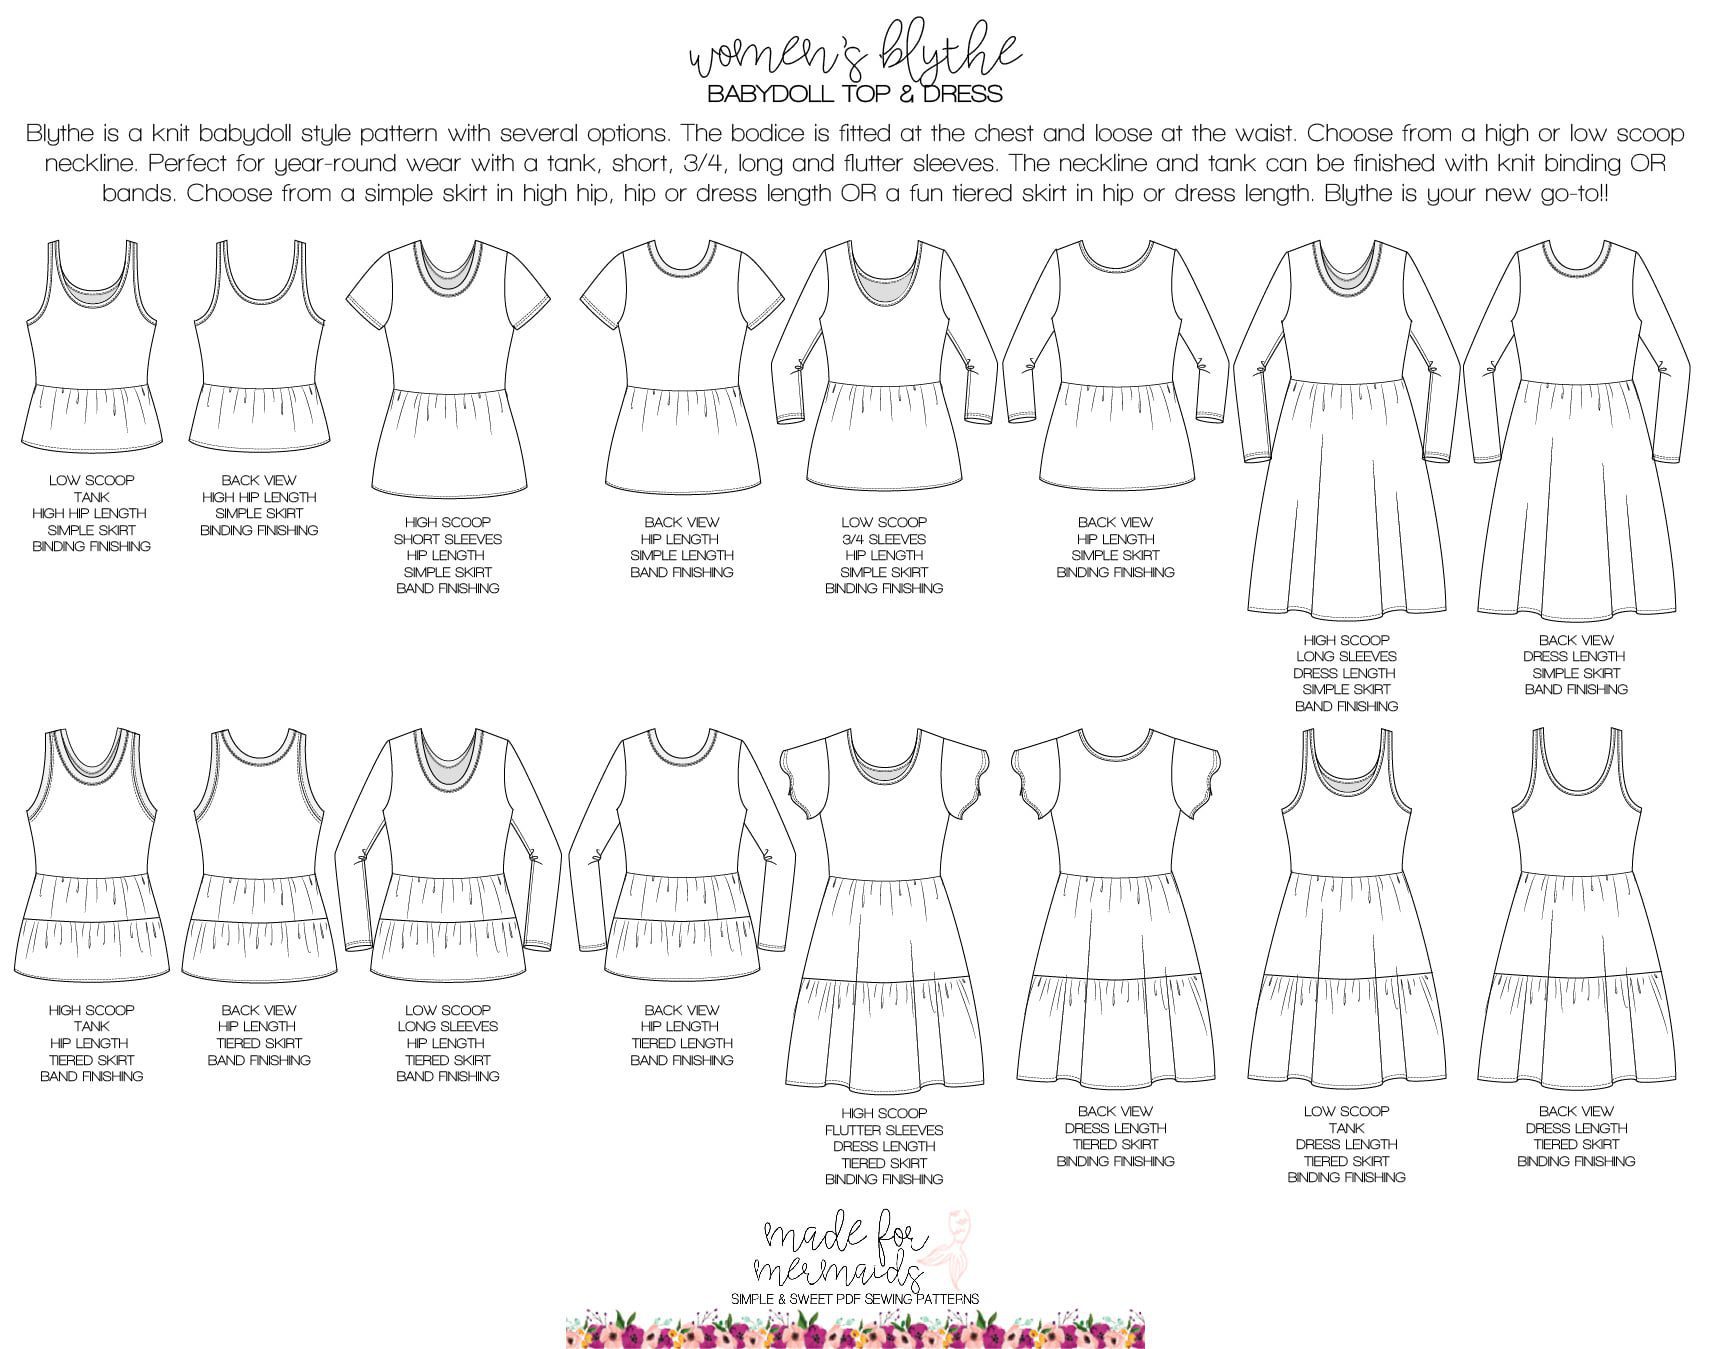 A Candy-Striped Blythe Babydoll Top by Made for Mermaids | Wild+Wanderful